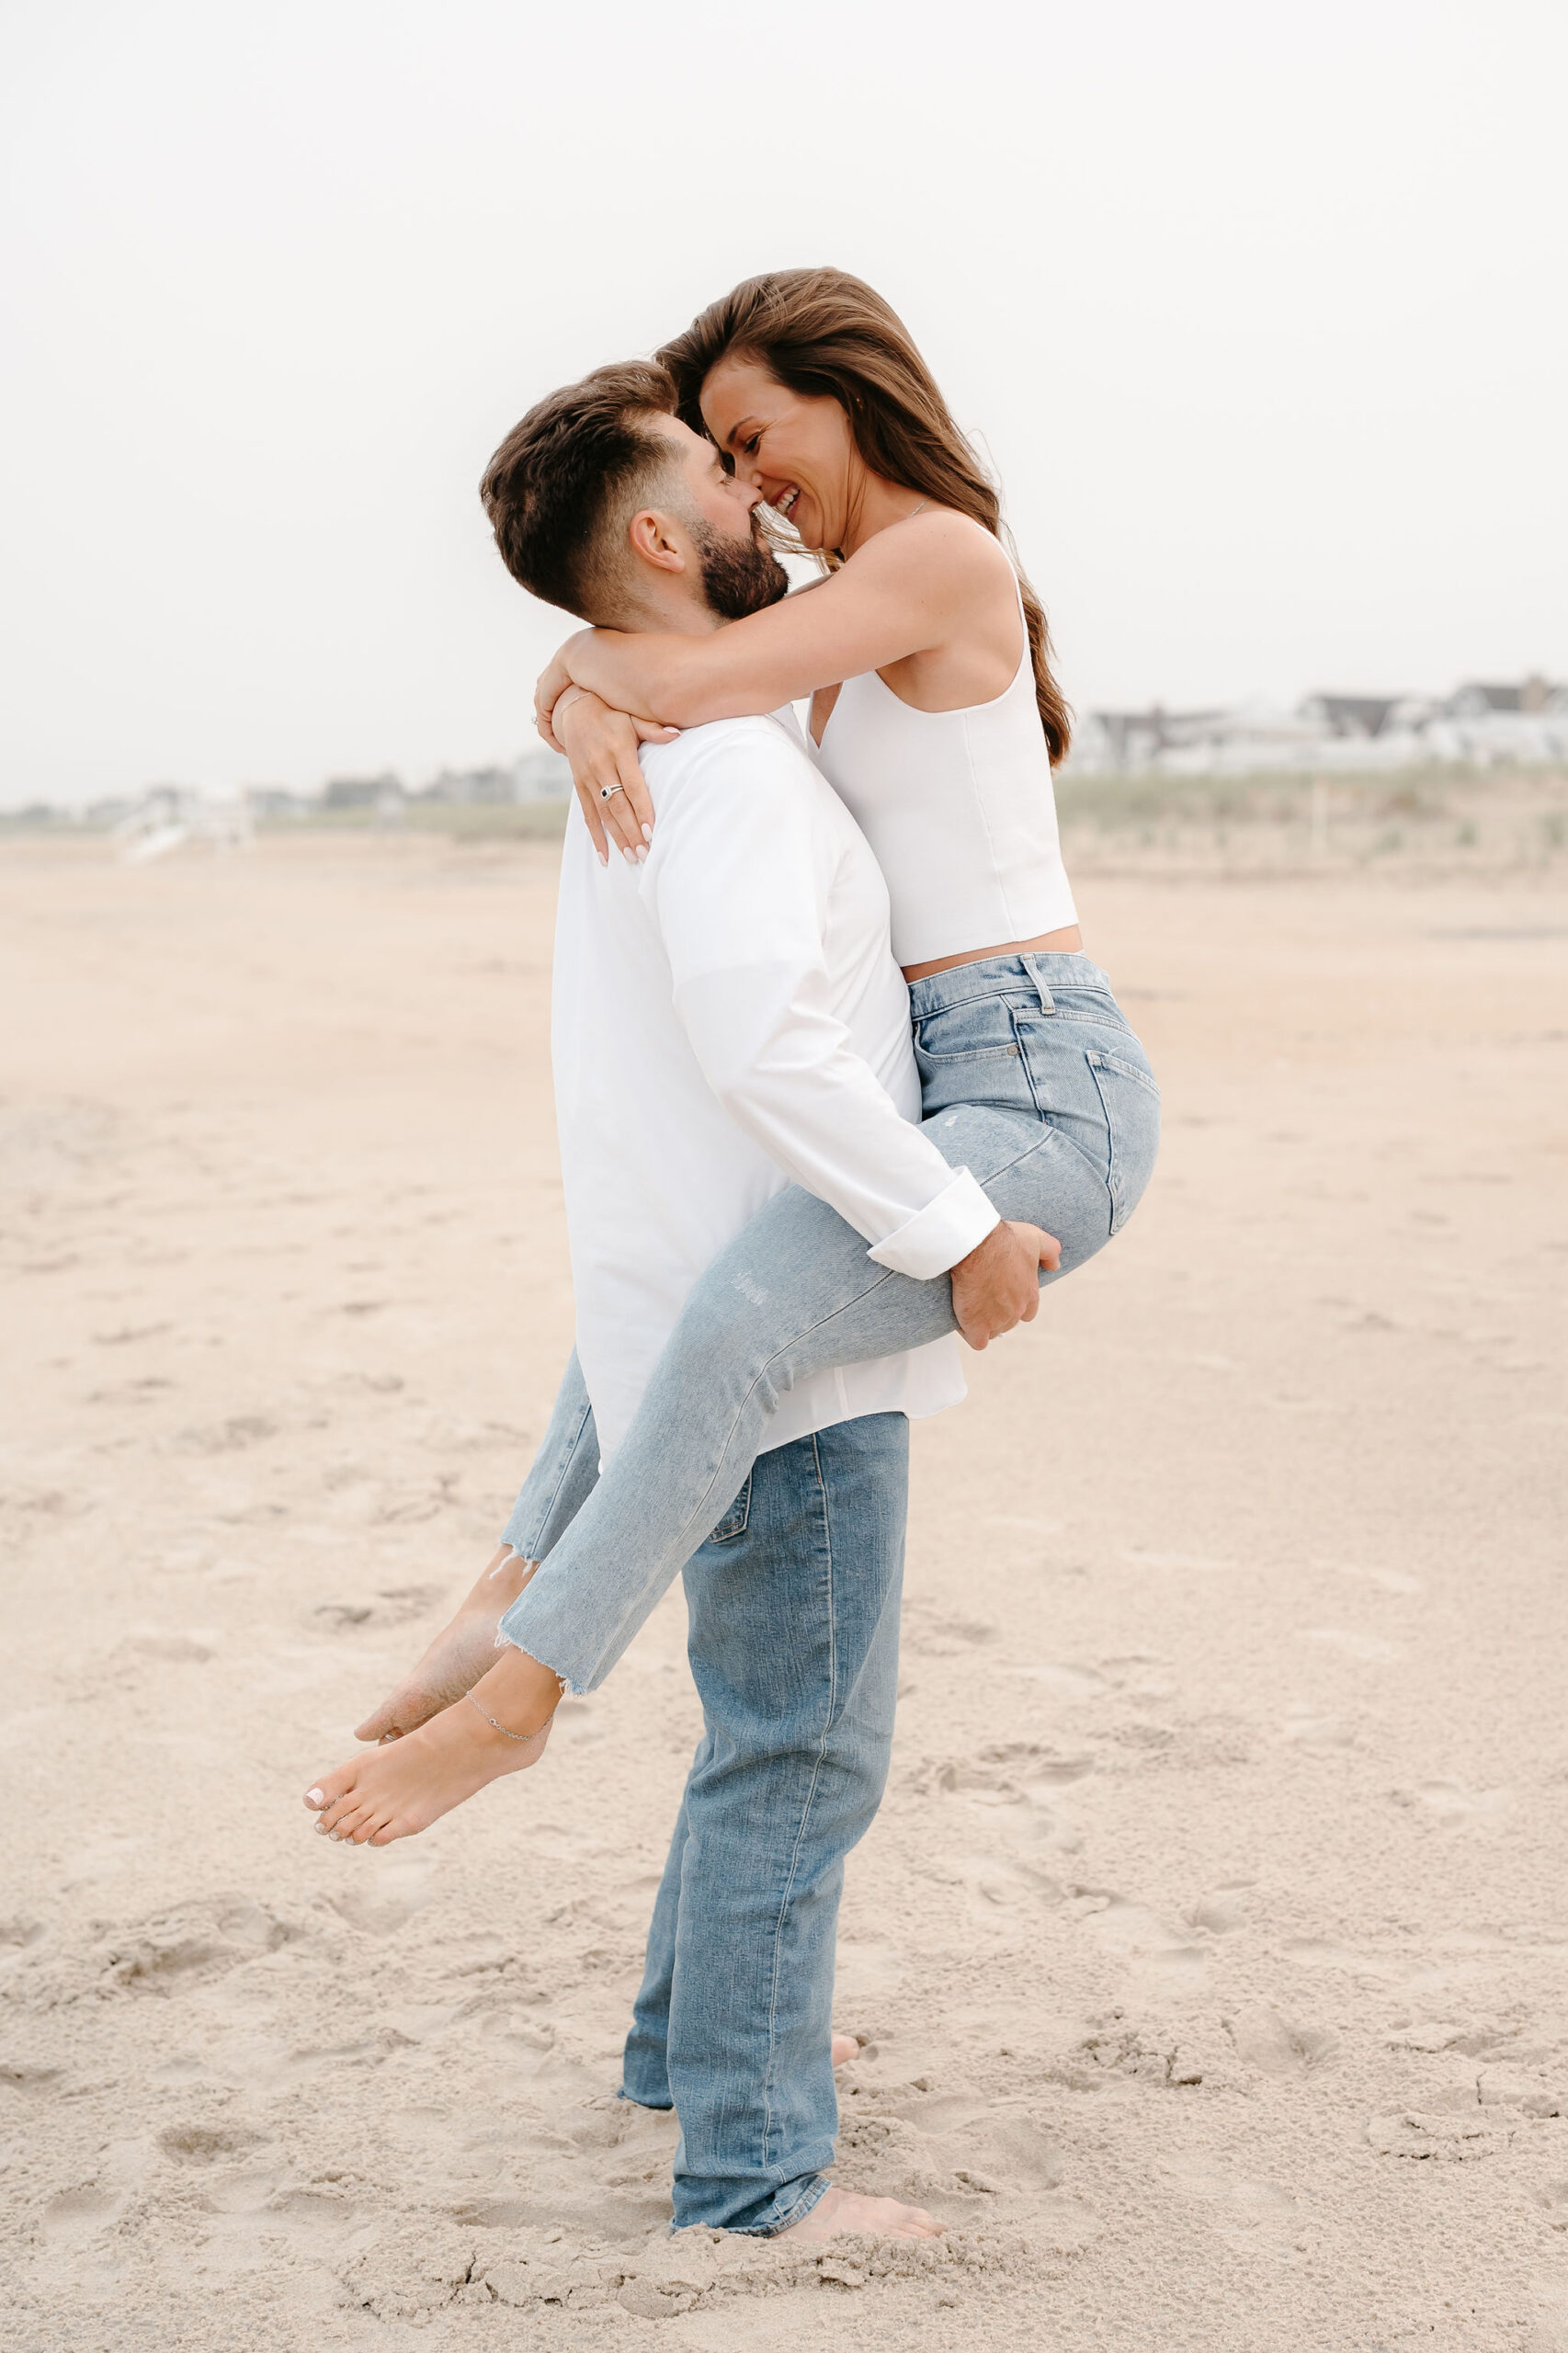 Spring Lake Beach engagement session by Lisa Blanche Photography